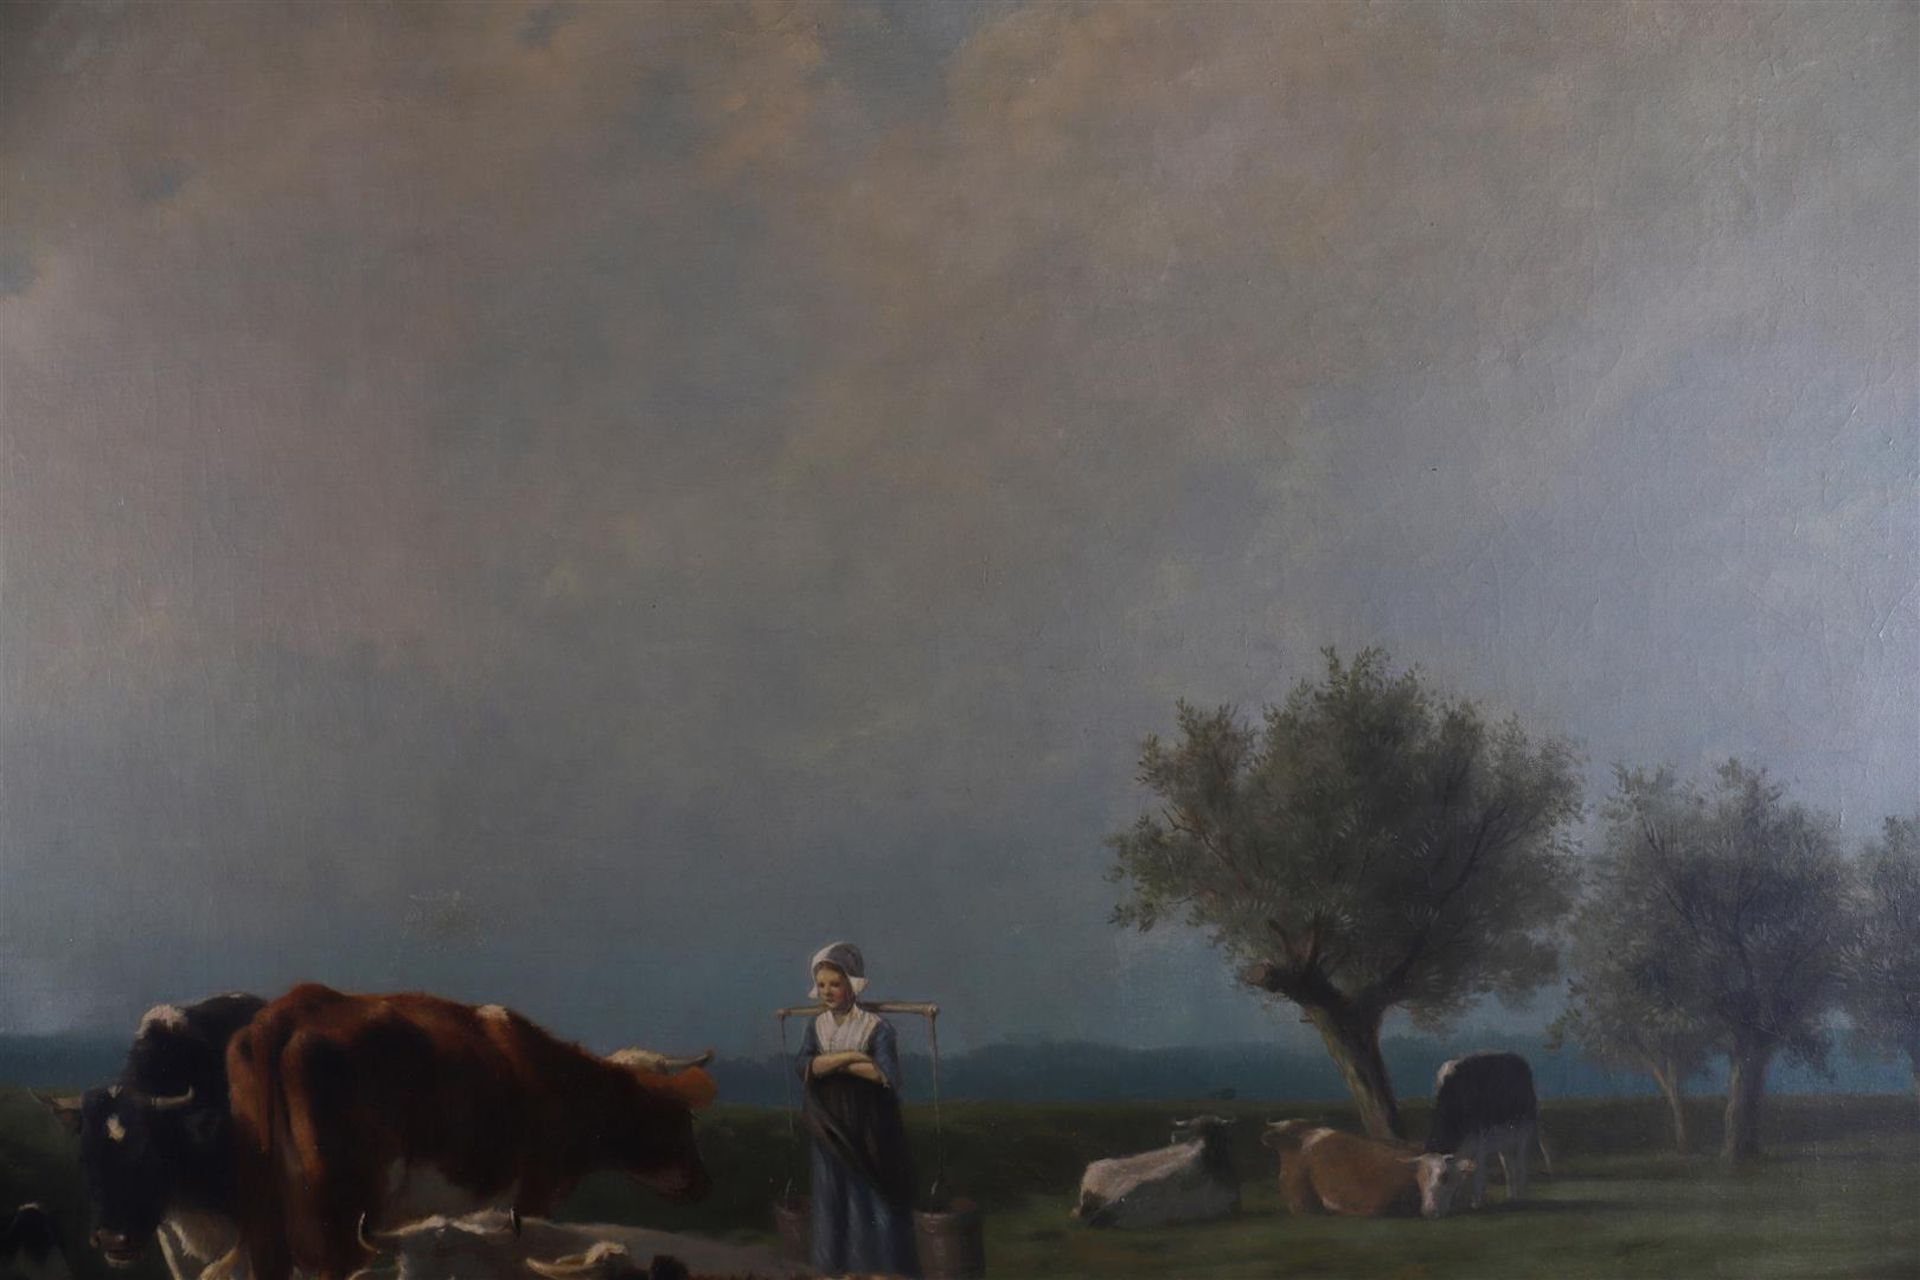 Mauve, Anthonie sr (Zaandam 1838-1888) "Cows and milkmaid in a landscape with pollard willows", - Image 13 of 18